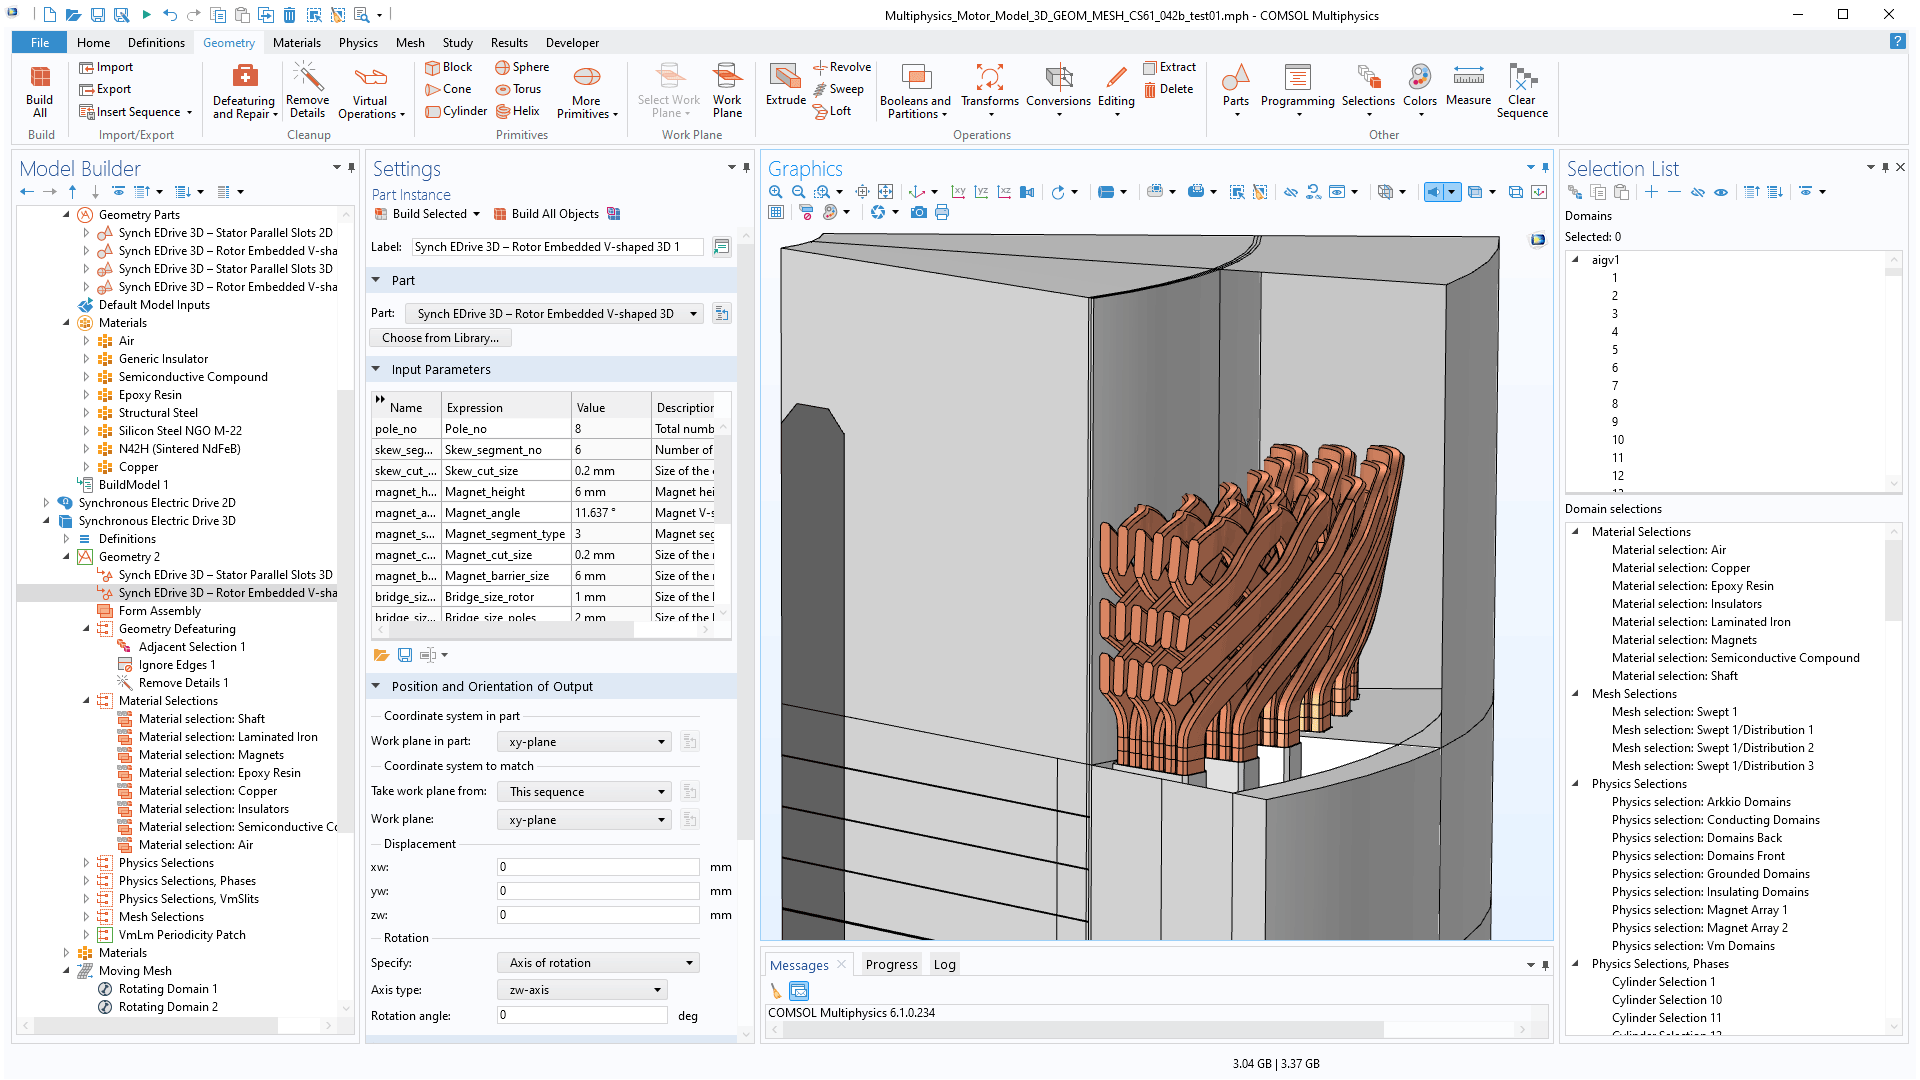 The COMSOL Multiphysics UI showing the Model Builder, the Part Instance Settings window, the Graphics window showing a permanent magnet motor model, and the Selection List window.